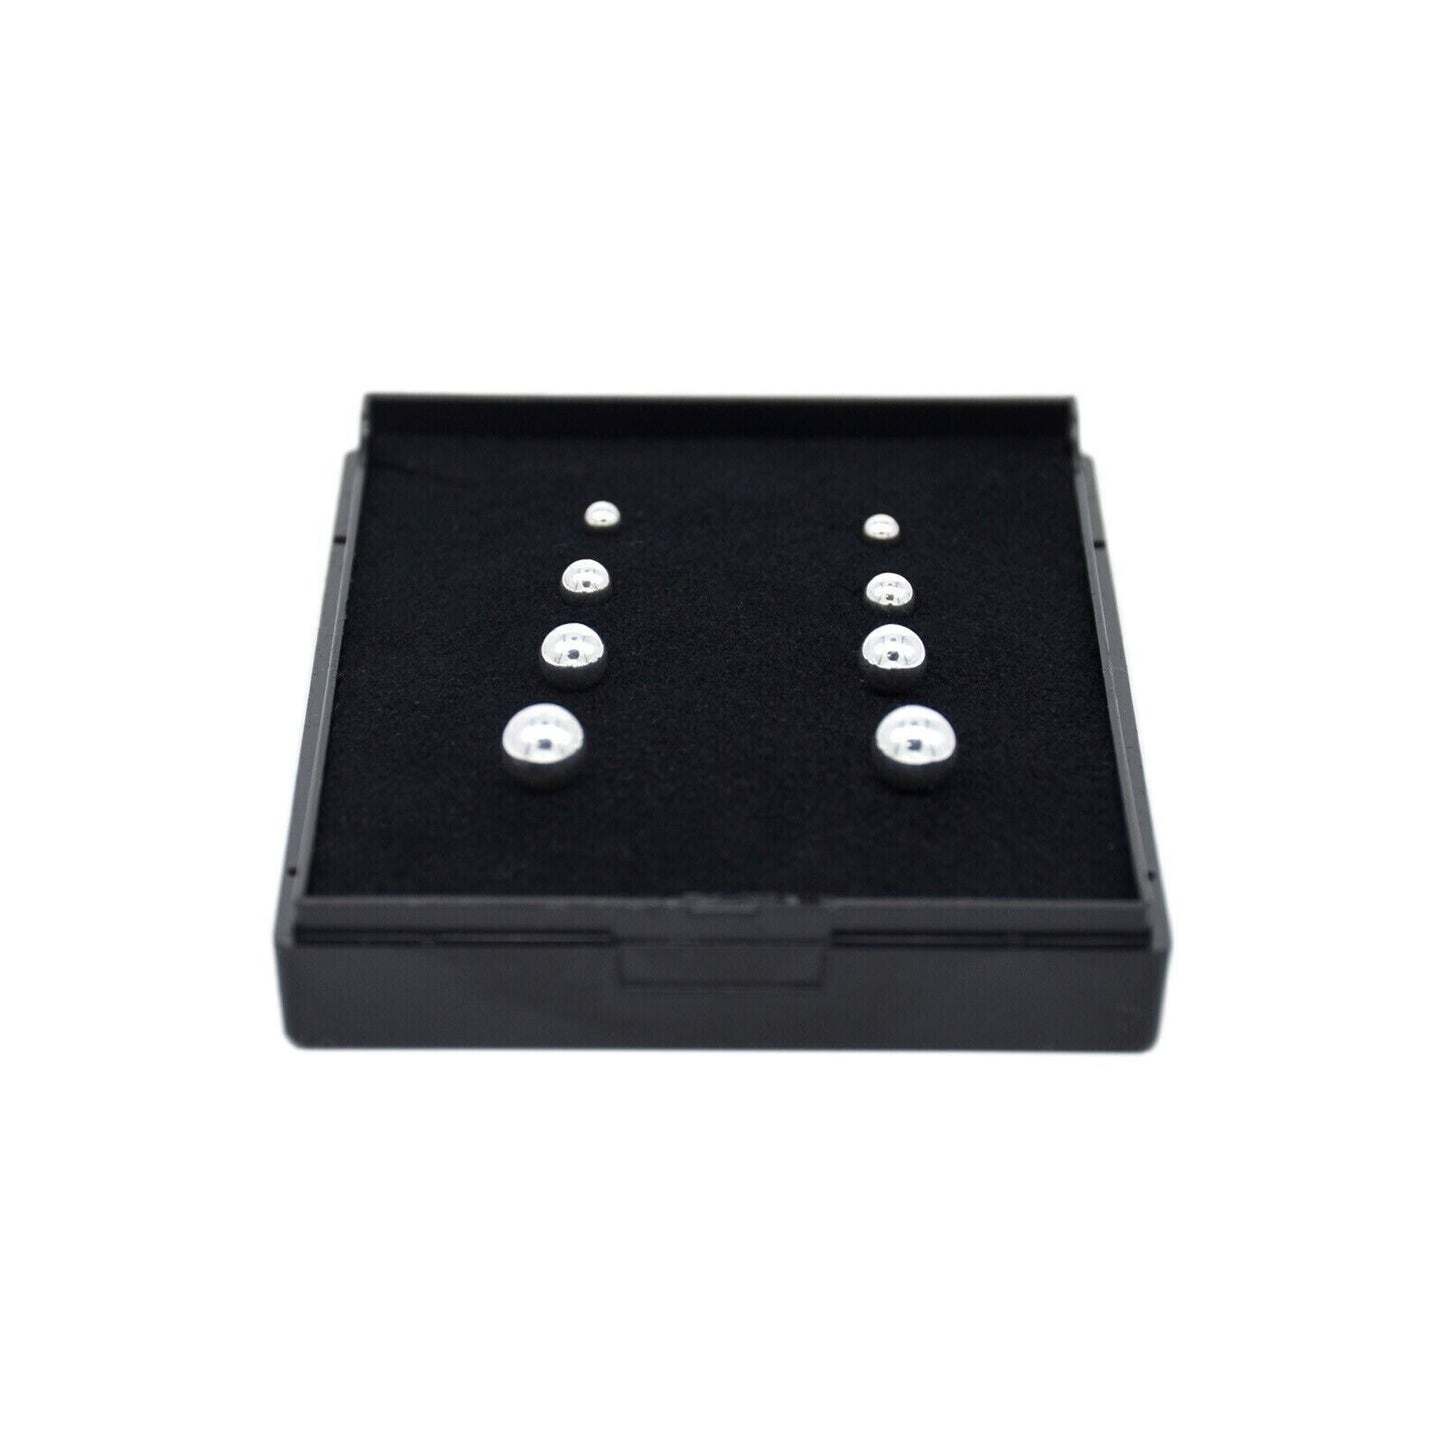 Genuine 925 Sterling Silver 3, 4, 5 & 6mm Polished Studs/Earrings In Gift Box